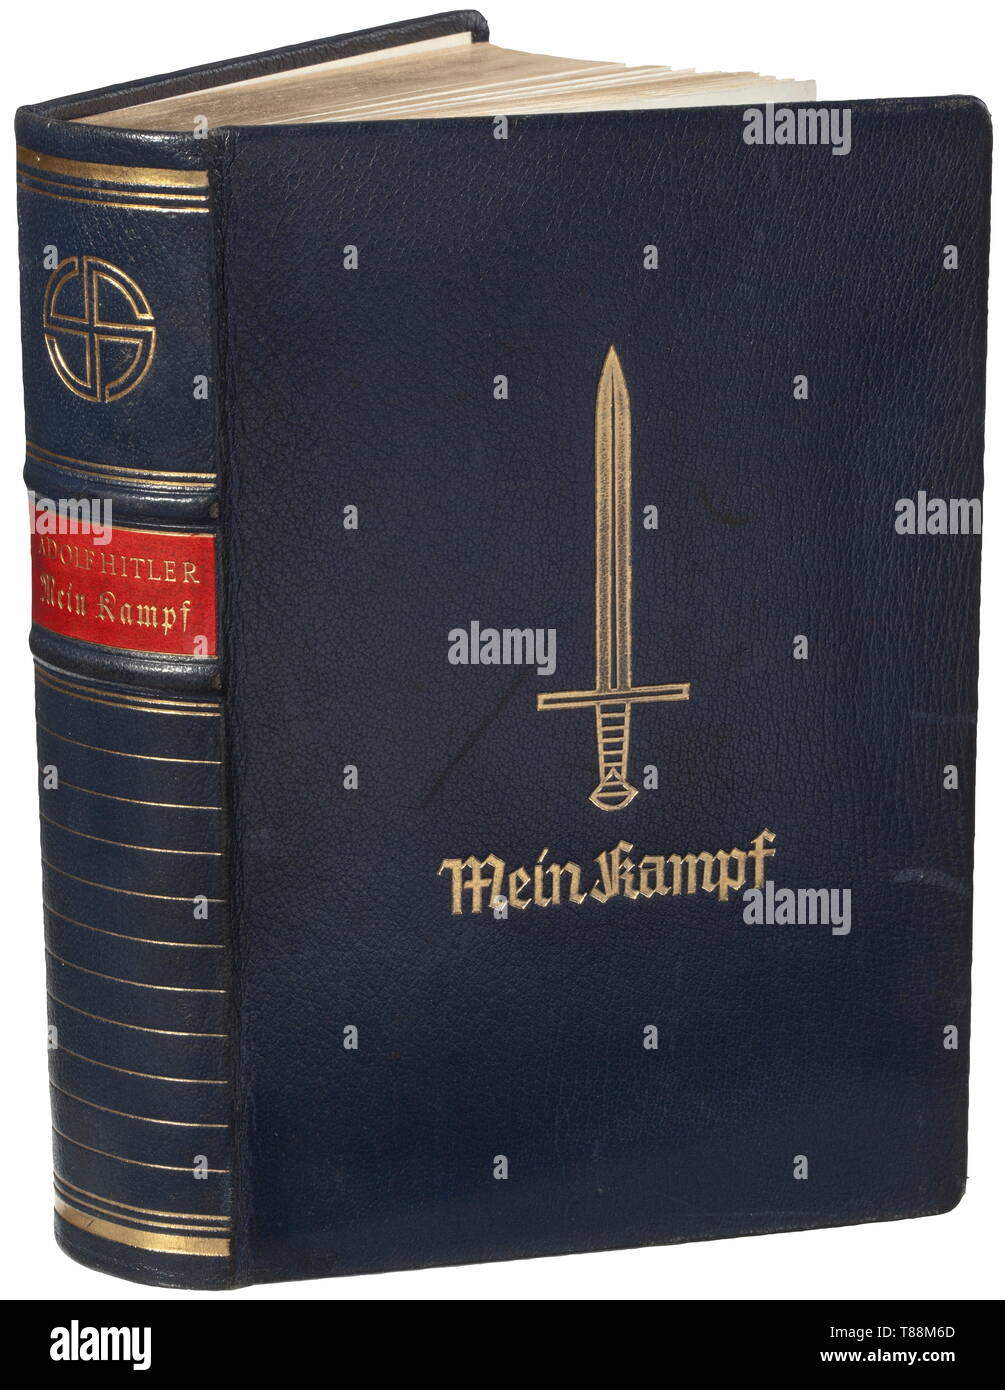 An Edition 'Mein Kampf' with dedication by Otto Ernst Remer to the Oak Leaves winner Rudolf Schlee who was considerably involved in the suppression of the plot of 20 July 1944 against Adolf Hitler. Anniversary edition 1939, published by Zentralverlag der NSDAP, Munich. Slightly foxed, the pages with gilt edging, cover of blue artificial leather. On the endpaper handwritten ink dedication by Otto Remer, battalion commander of the regiment 'Grossdeutschland' to Schlee who was promoted to captain. The wording (tr.): 'The Führer has given 20th century, Editorial-Use-Only Stock Photo